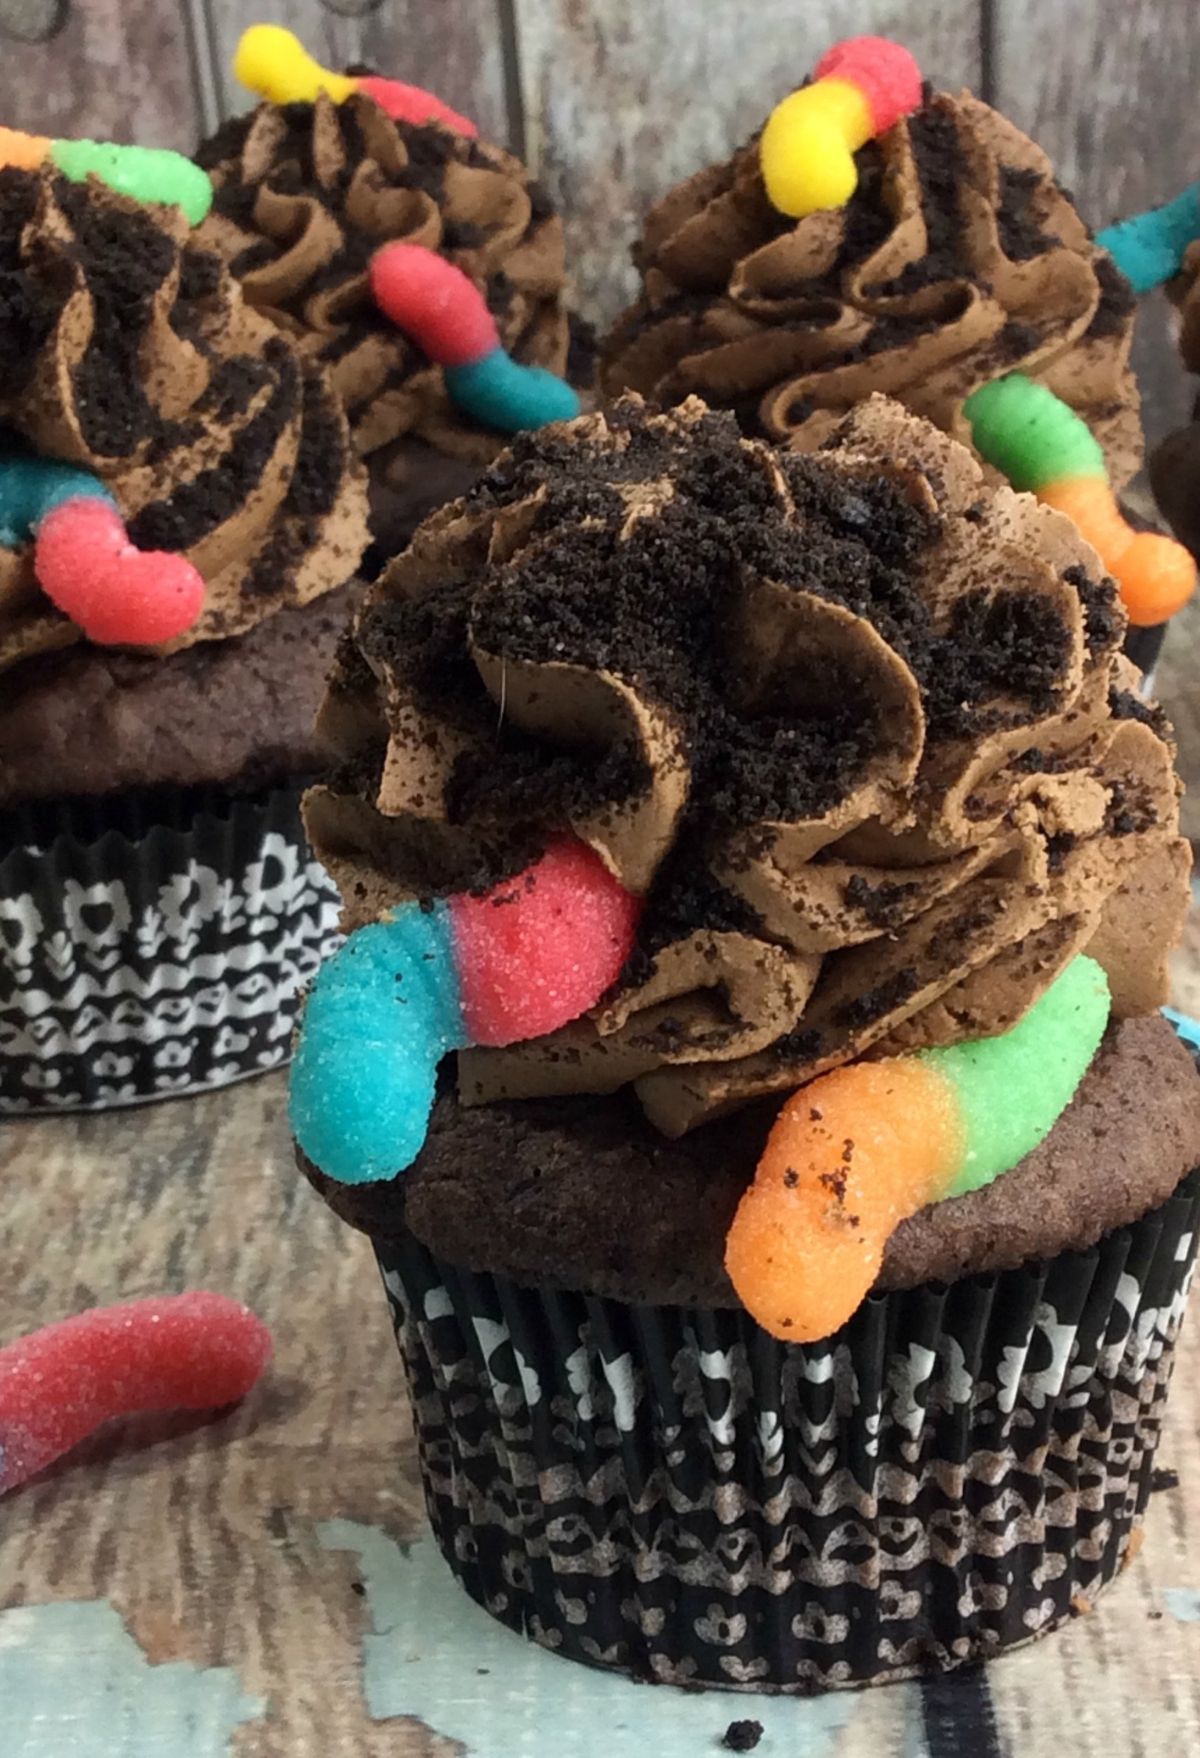 Chocolate cupcakes with gummy worms on top.